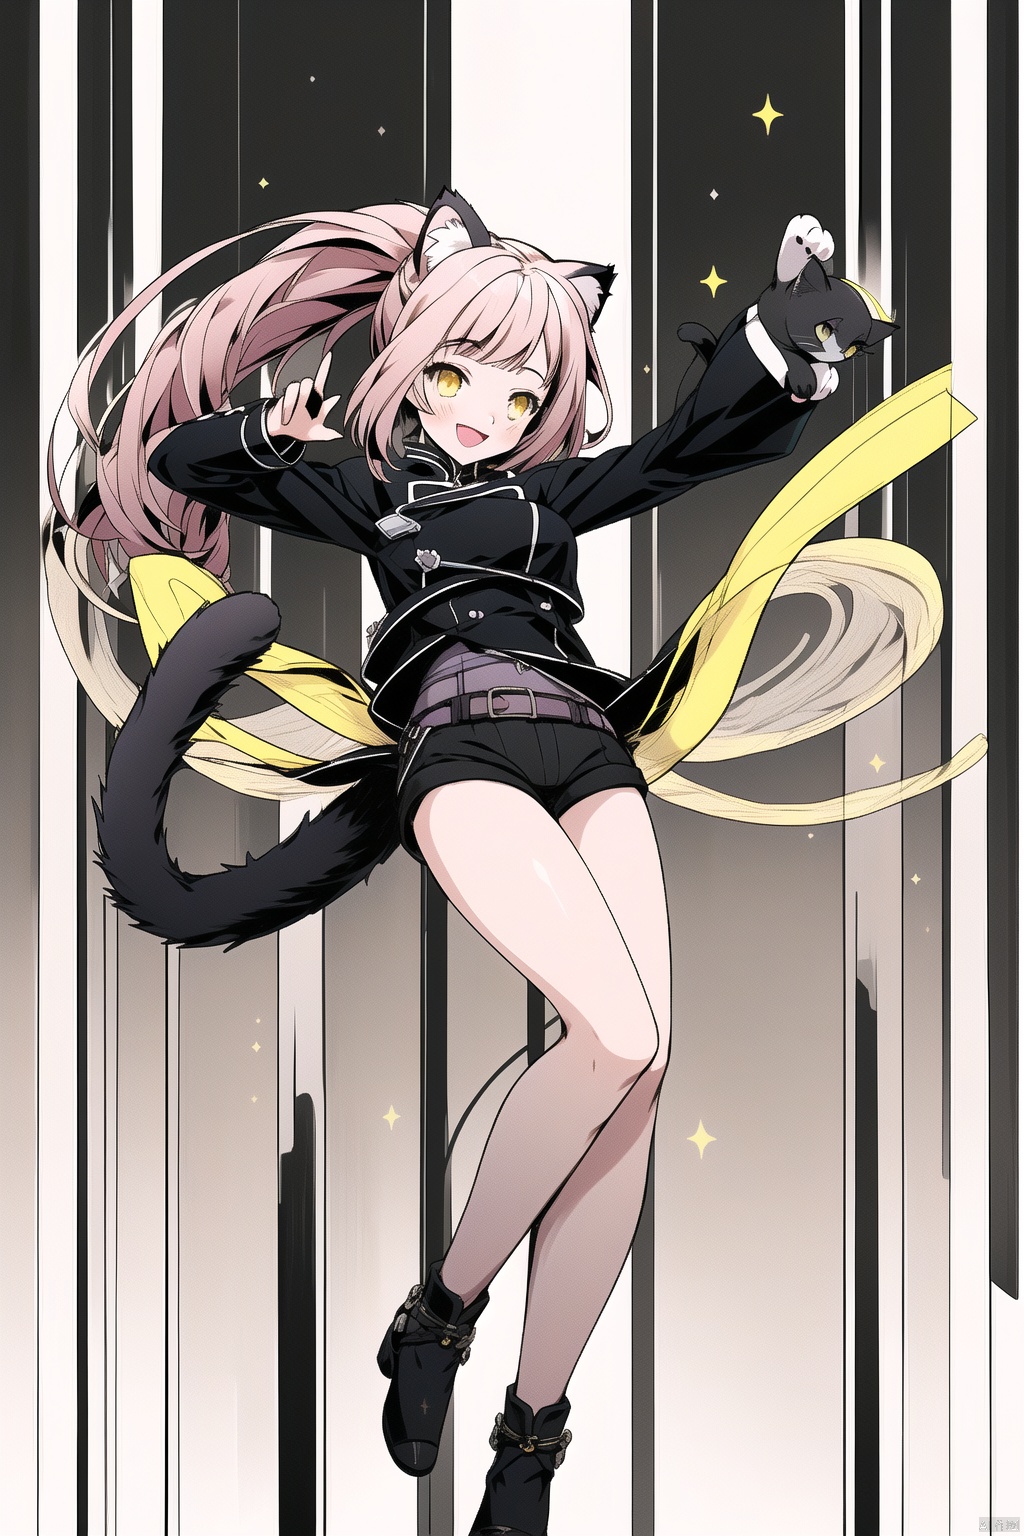  hires,8k,effect,high detail,effect background,dancing1girl,yellow hair, tow long_ponytail,black cloth, short shorts, long feet ,(unlight:1.3),ink art,uniform , Unlight,cat ear, none, shine eyes01,
1girl, multiple colored hairs,black cat tail, smile
